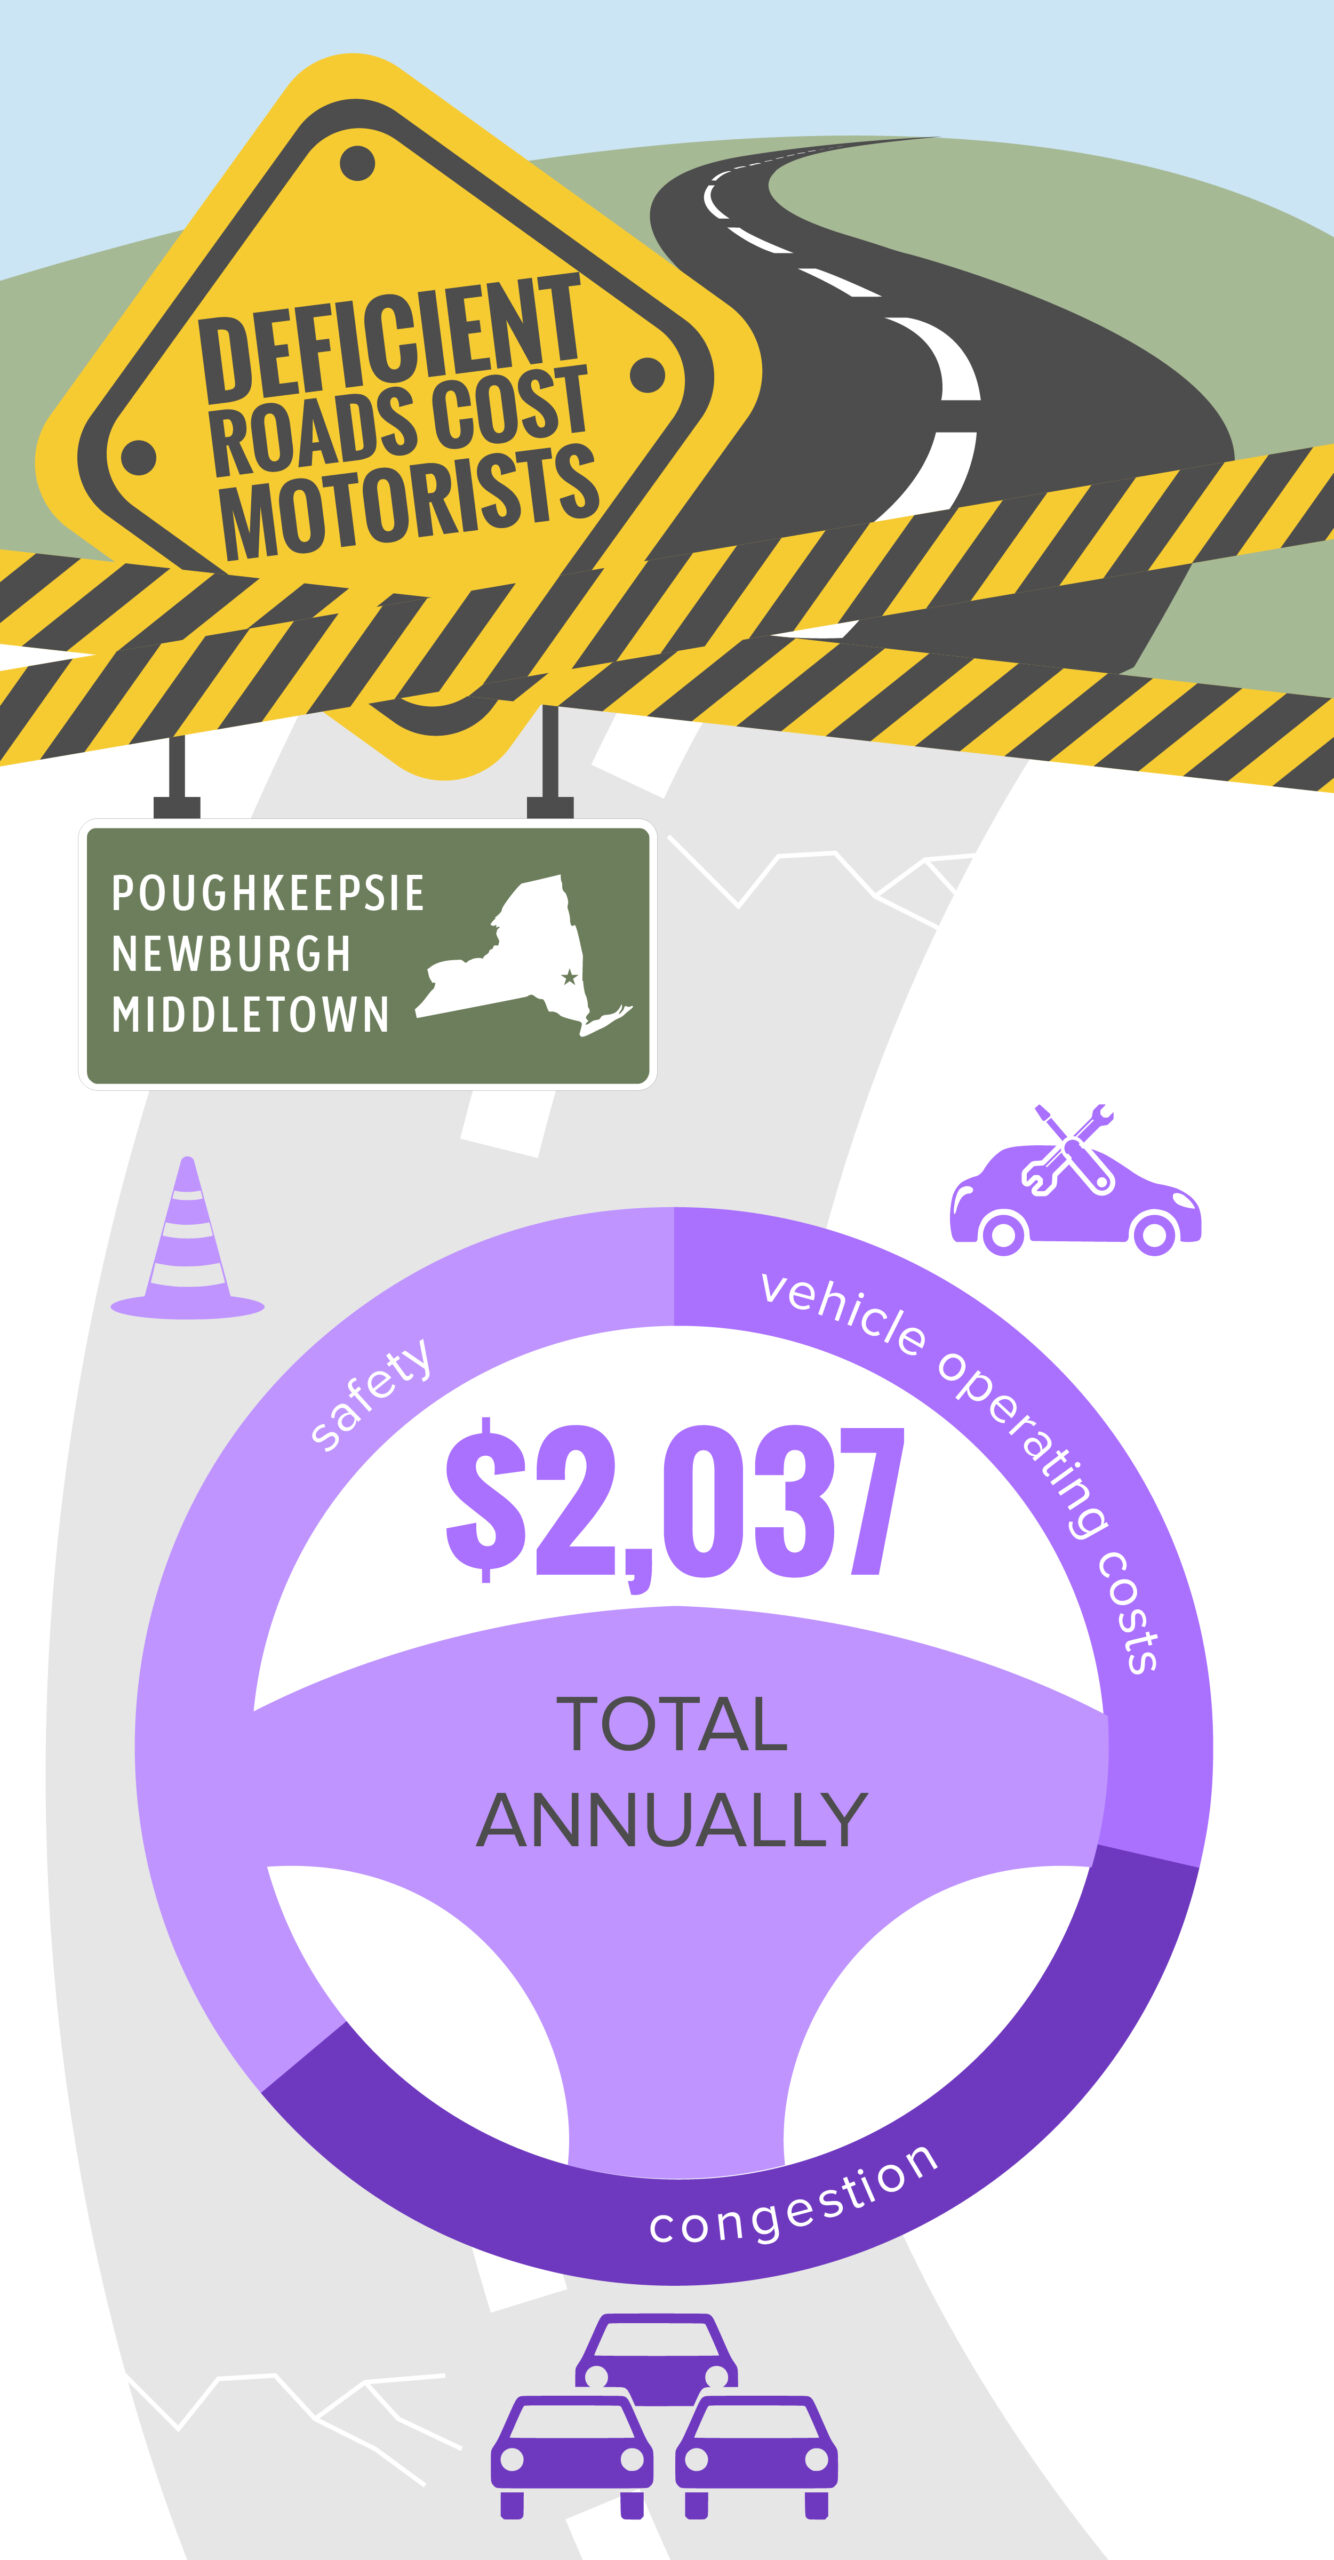 Poughkeepsie-Newburgh-Middletown Deficient Roads Cost to Motorists Infographic – January 2024